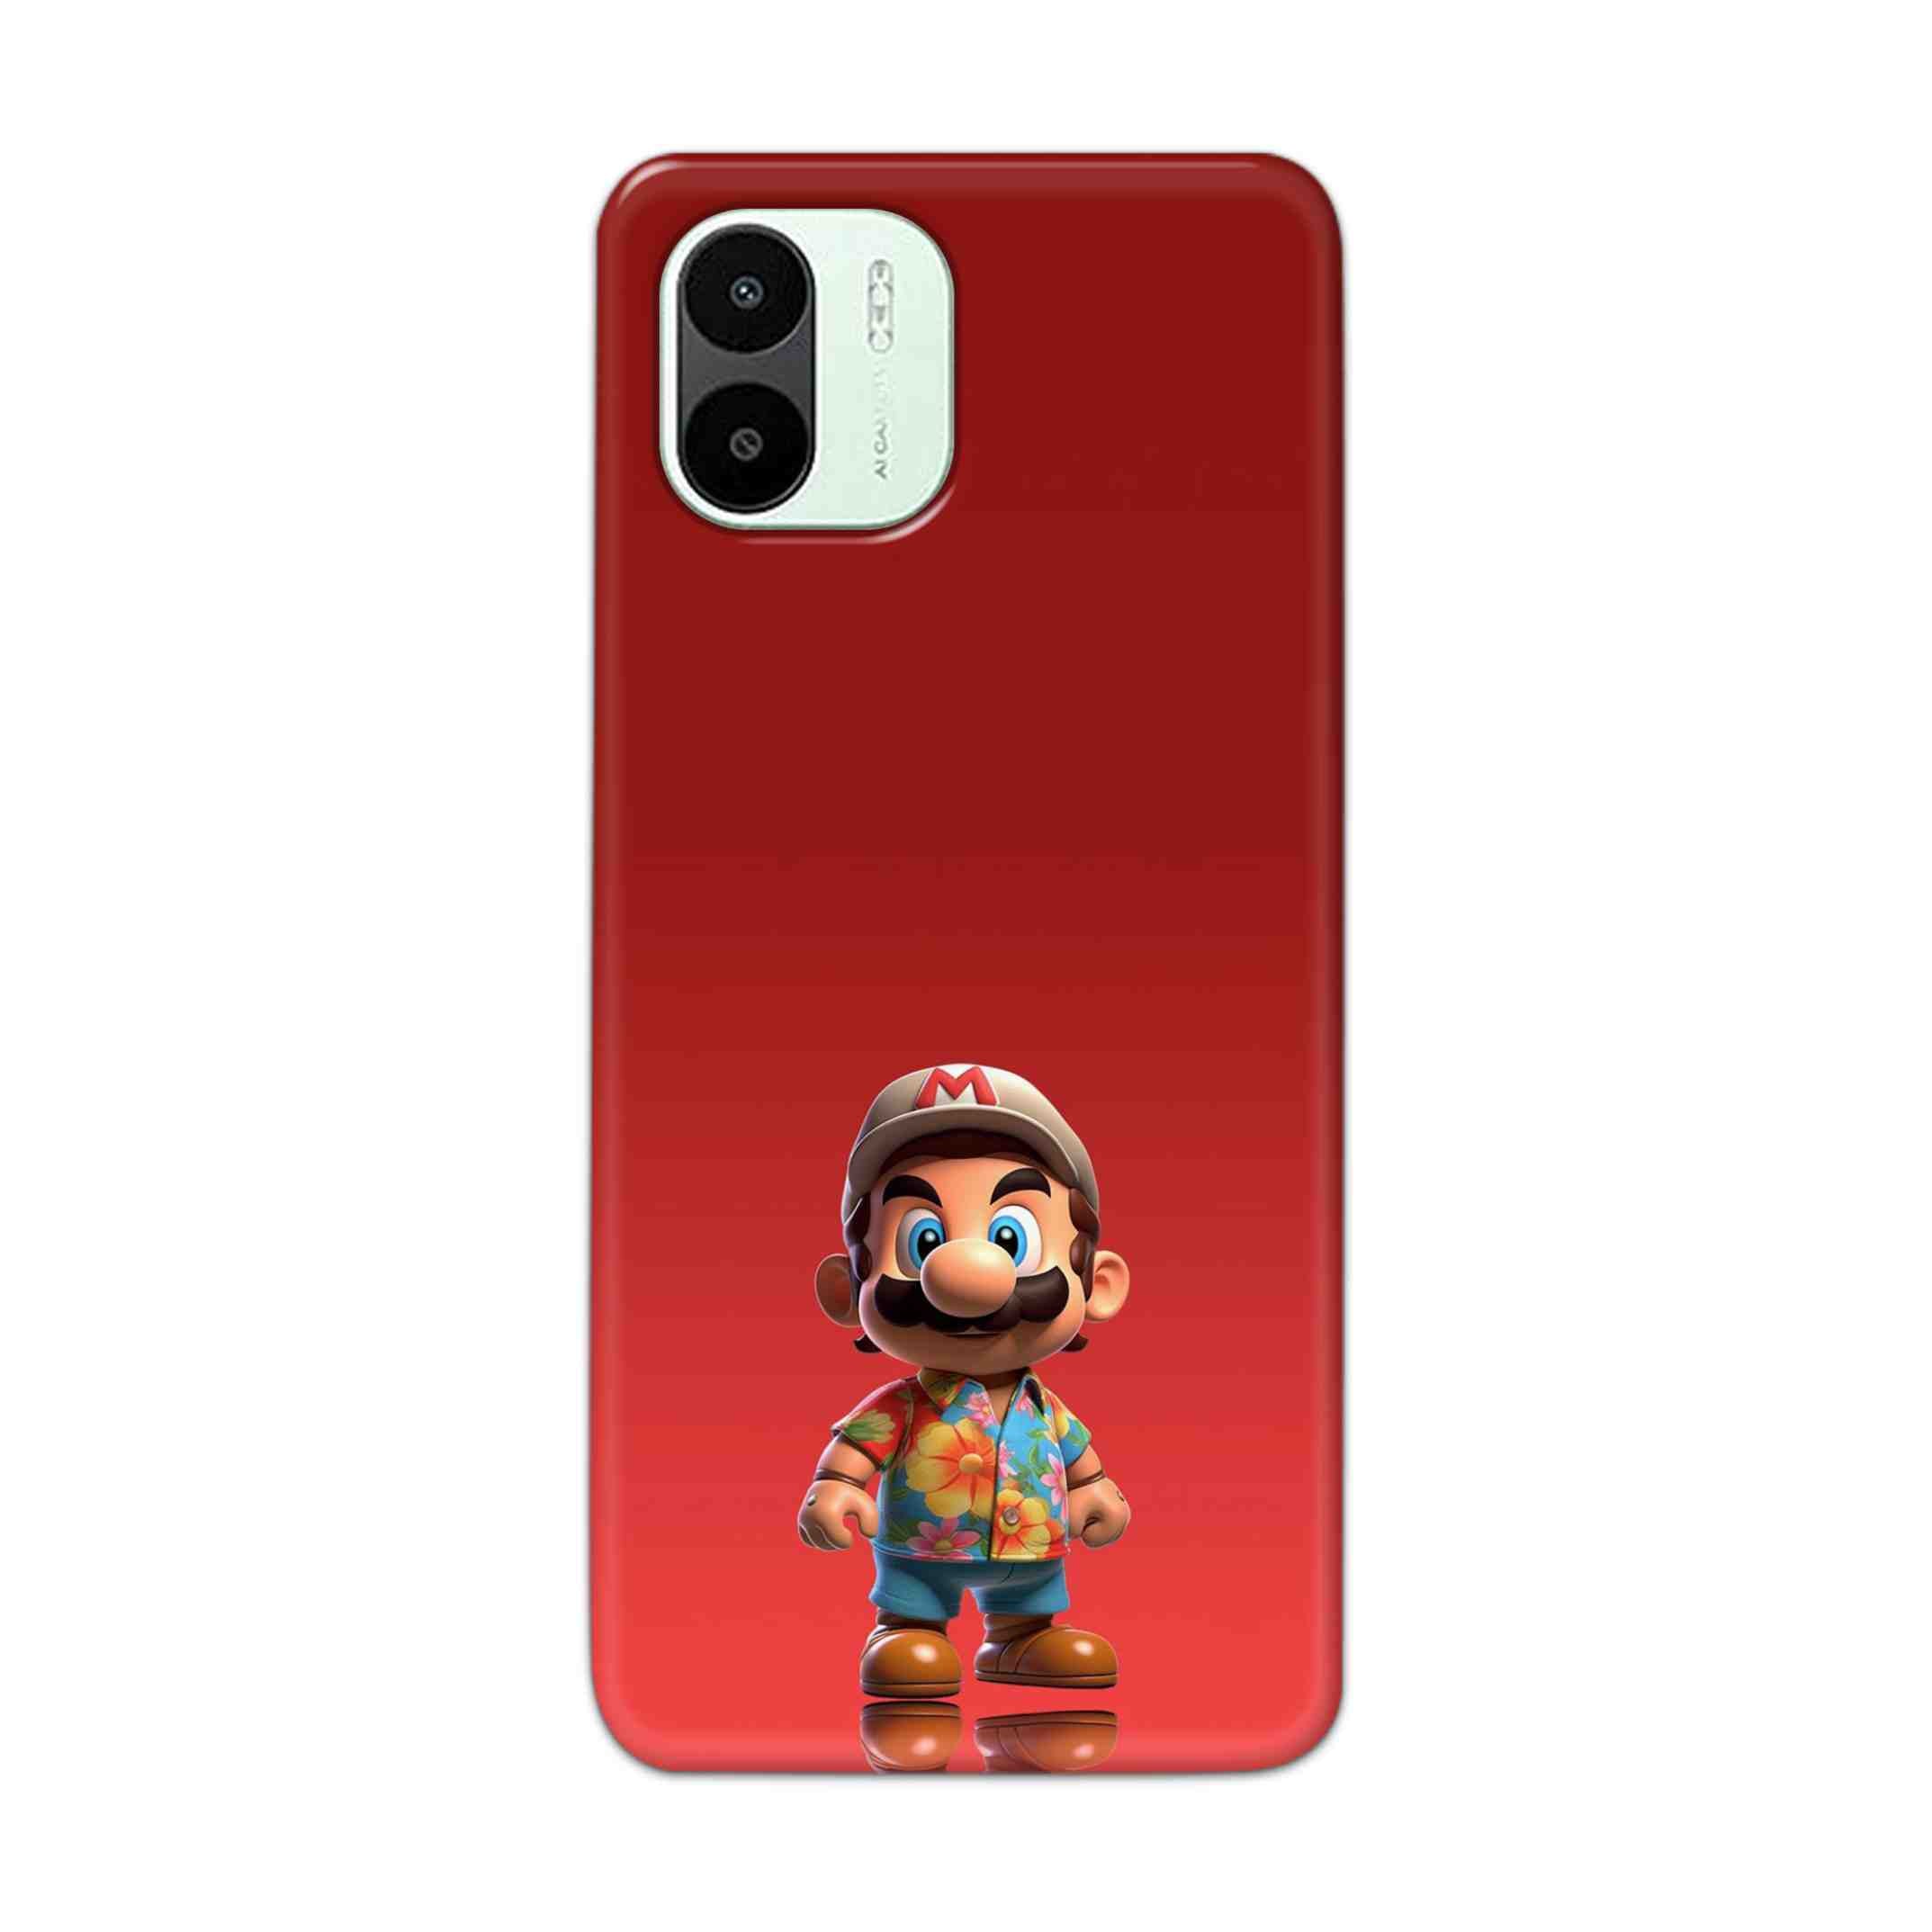 Buy Mario Hard Back Mobile Phone Case Cover For Xiaomi Redmi A1 5G Online